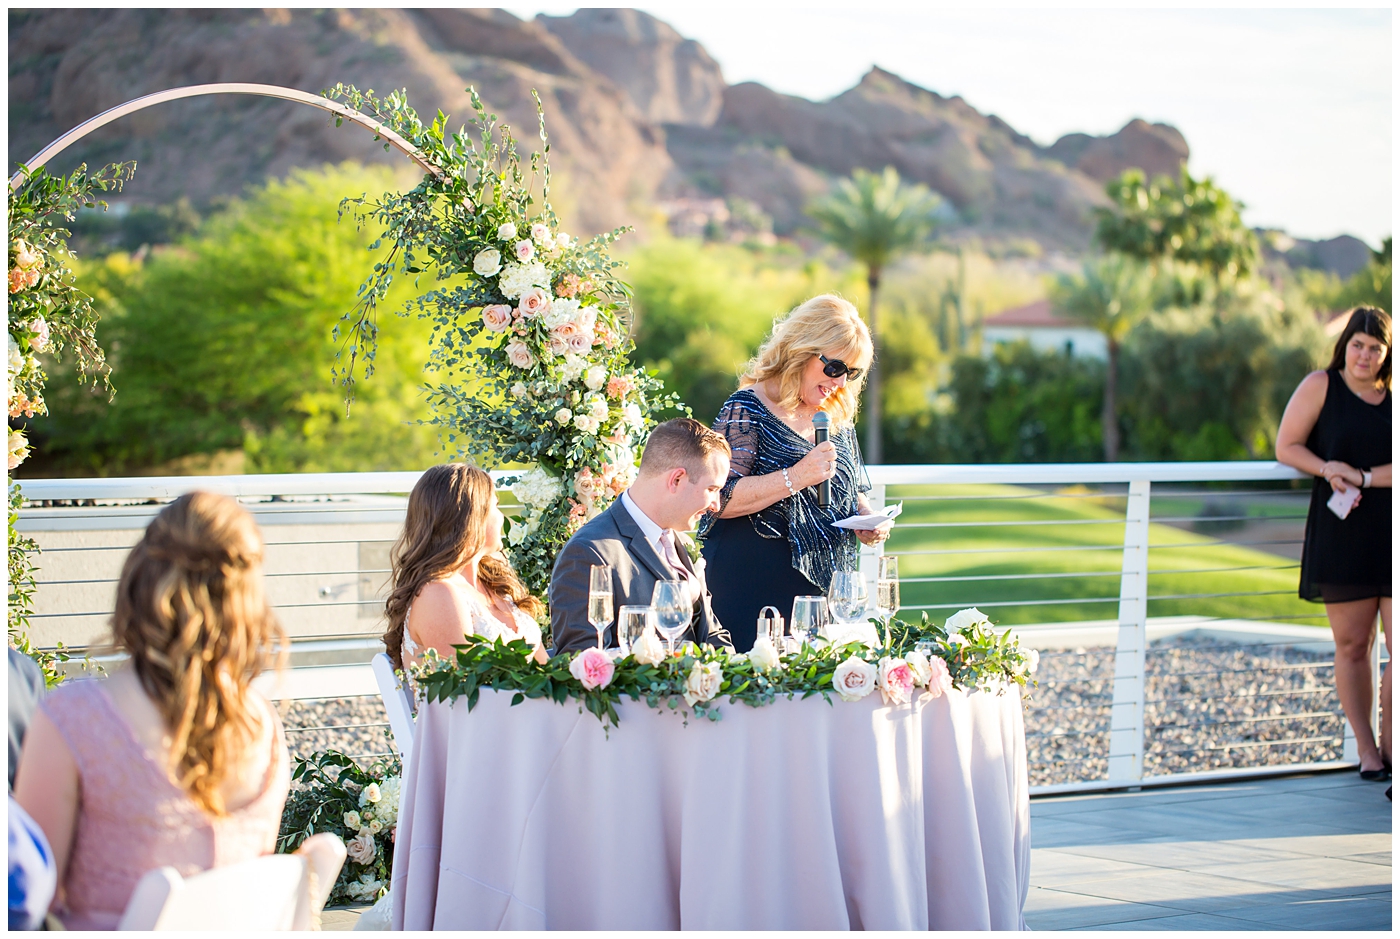 mother of groom giving speech with unique circle arch for outdoor rooftop wedding reception with wildflowers in blush and white with greenery with mountain in background